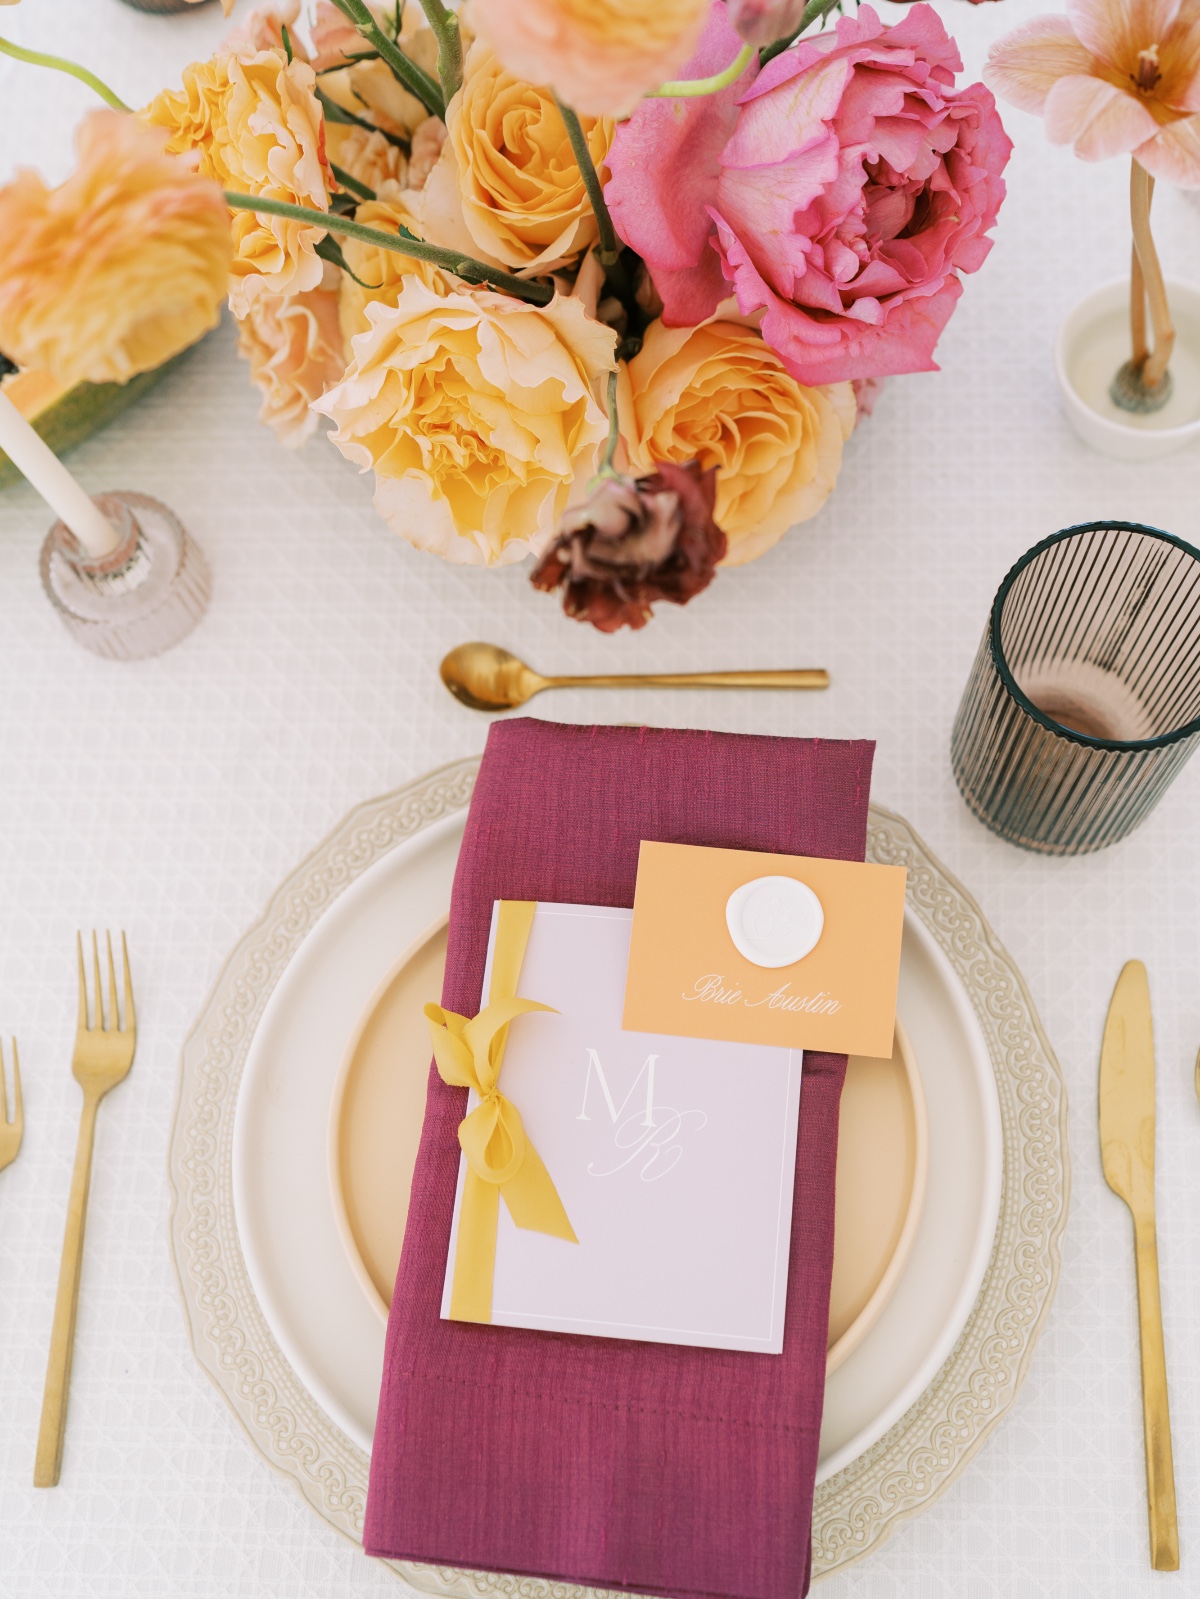 magenta and yellow place settings